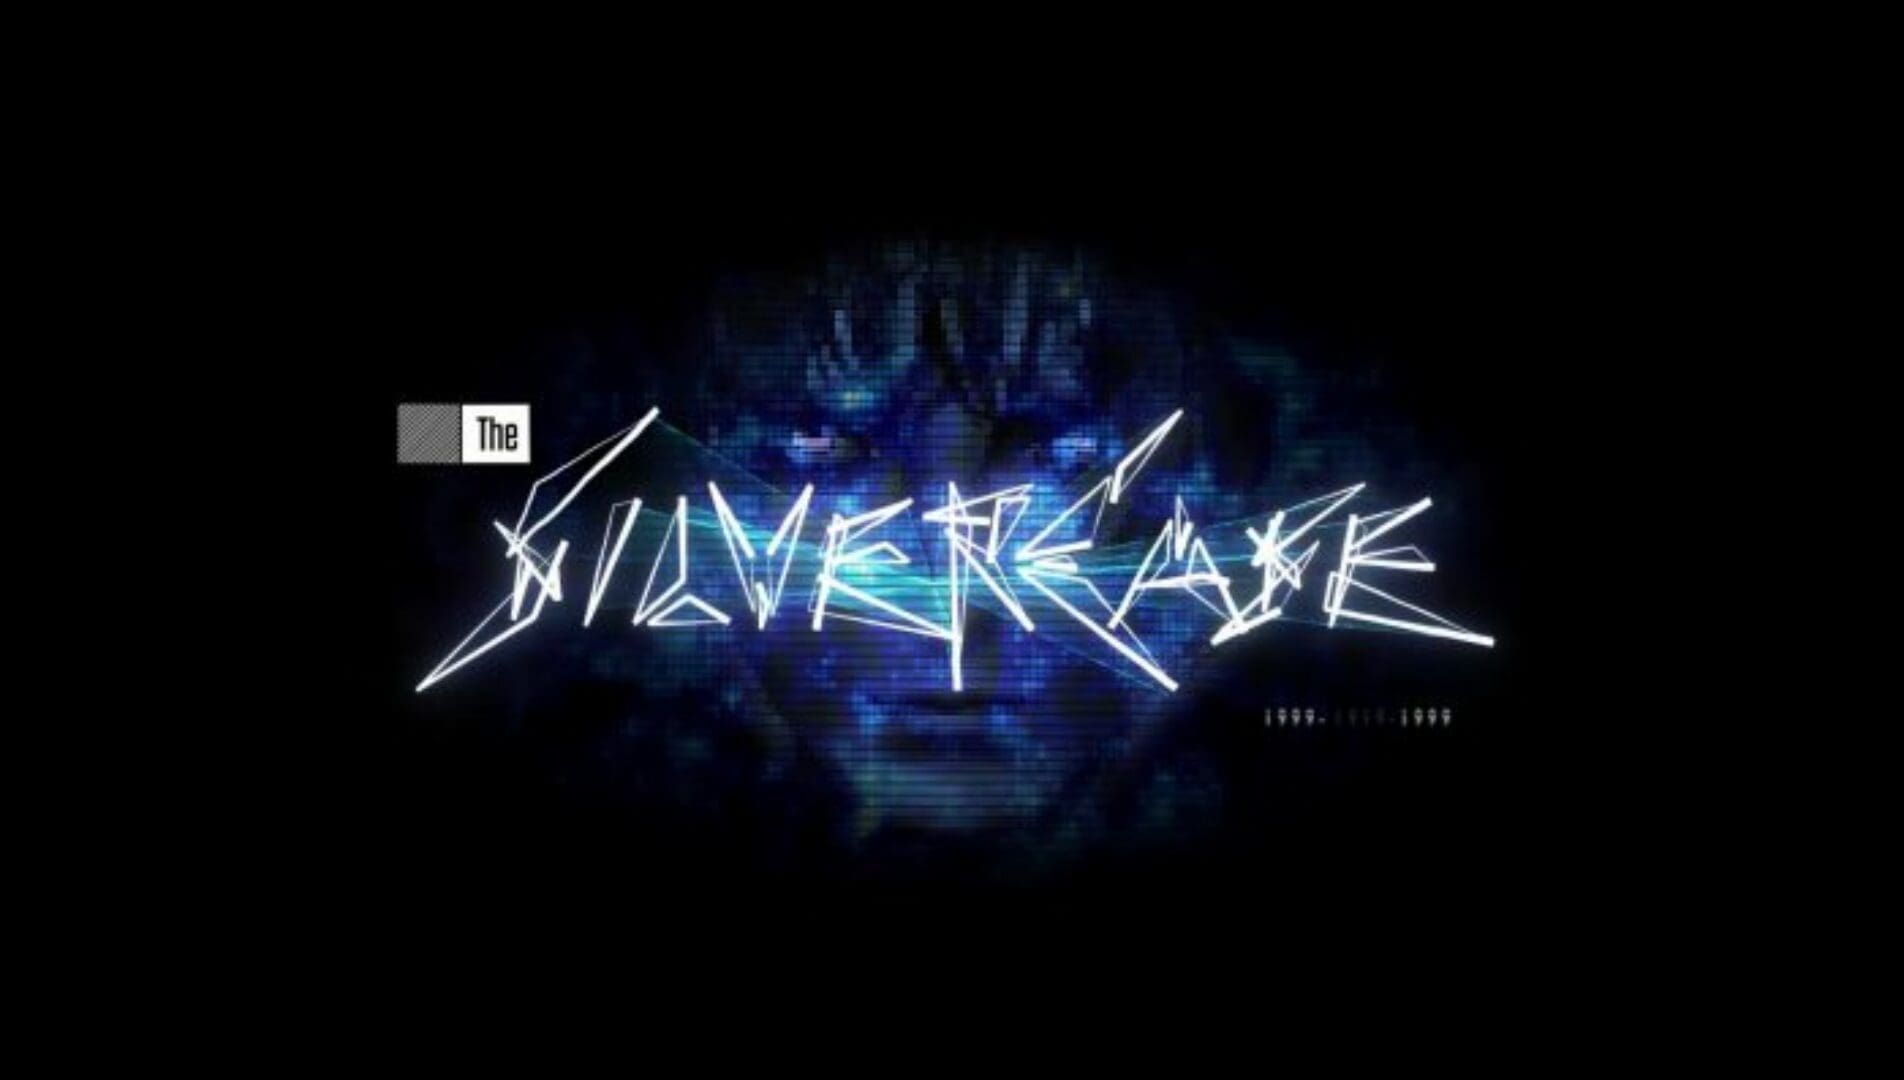 Release Date Confirmed for The Silver Case on PS4